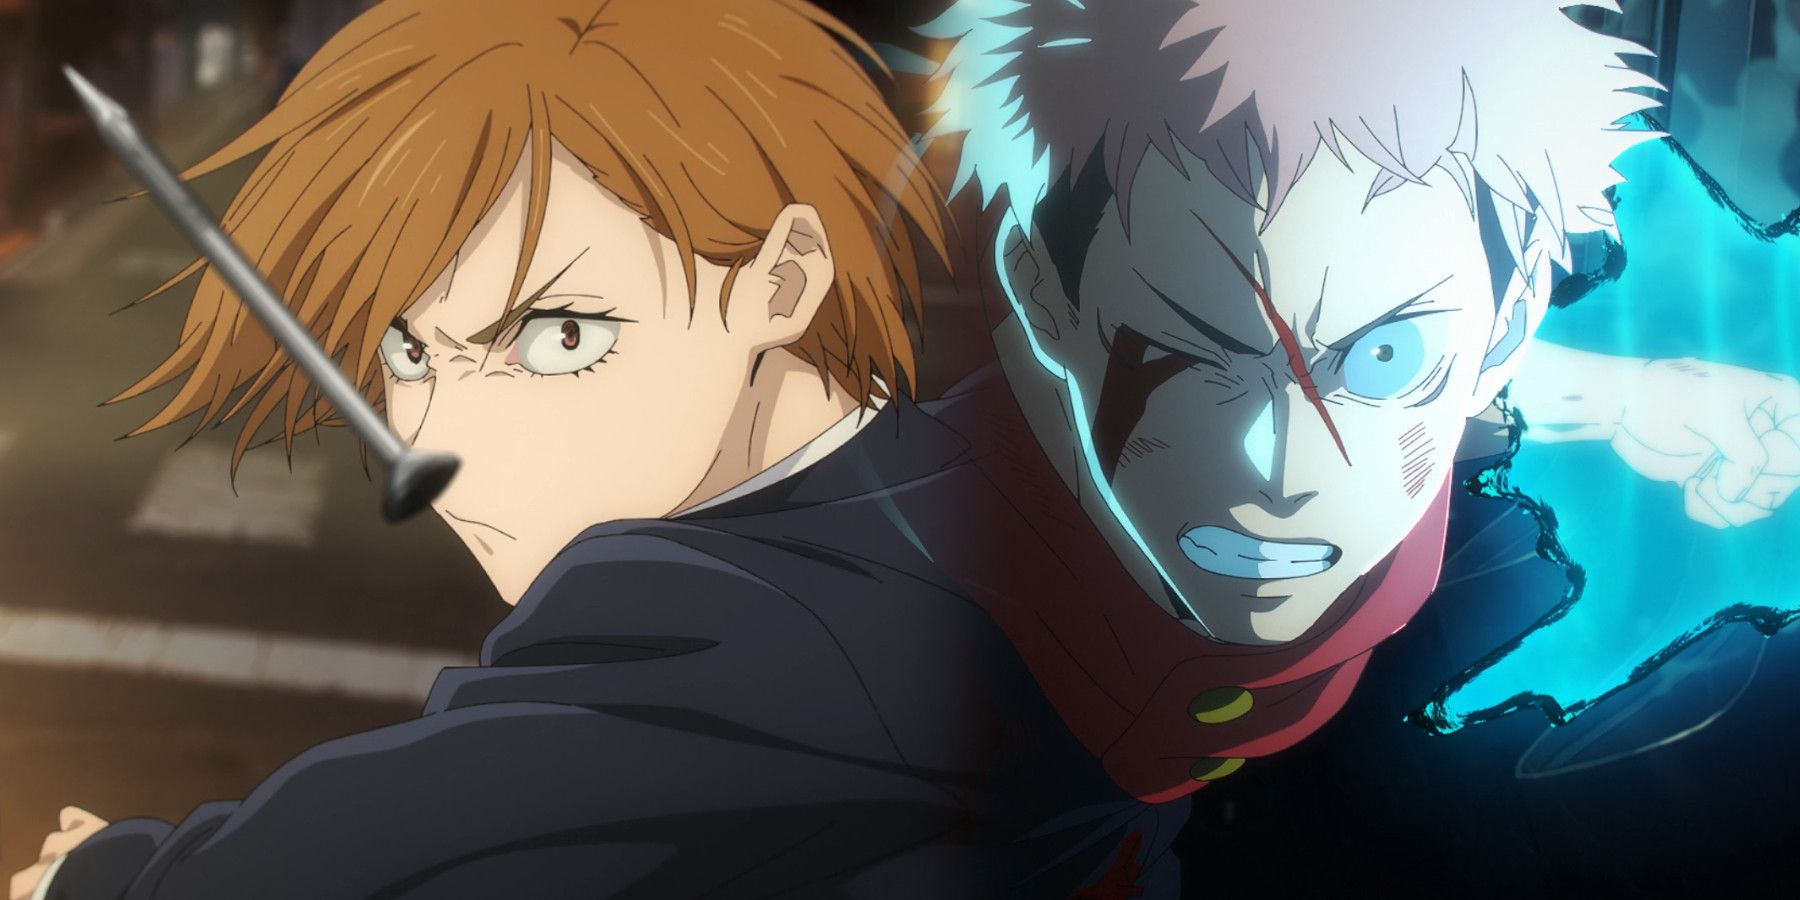 REVIEW: 'Jujutsu Kaisen,' Episode 17 - “Kyoto Sister School Exchange Event  - Group Battle 3 - But Why Tho?